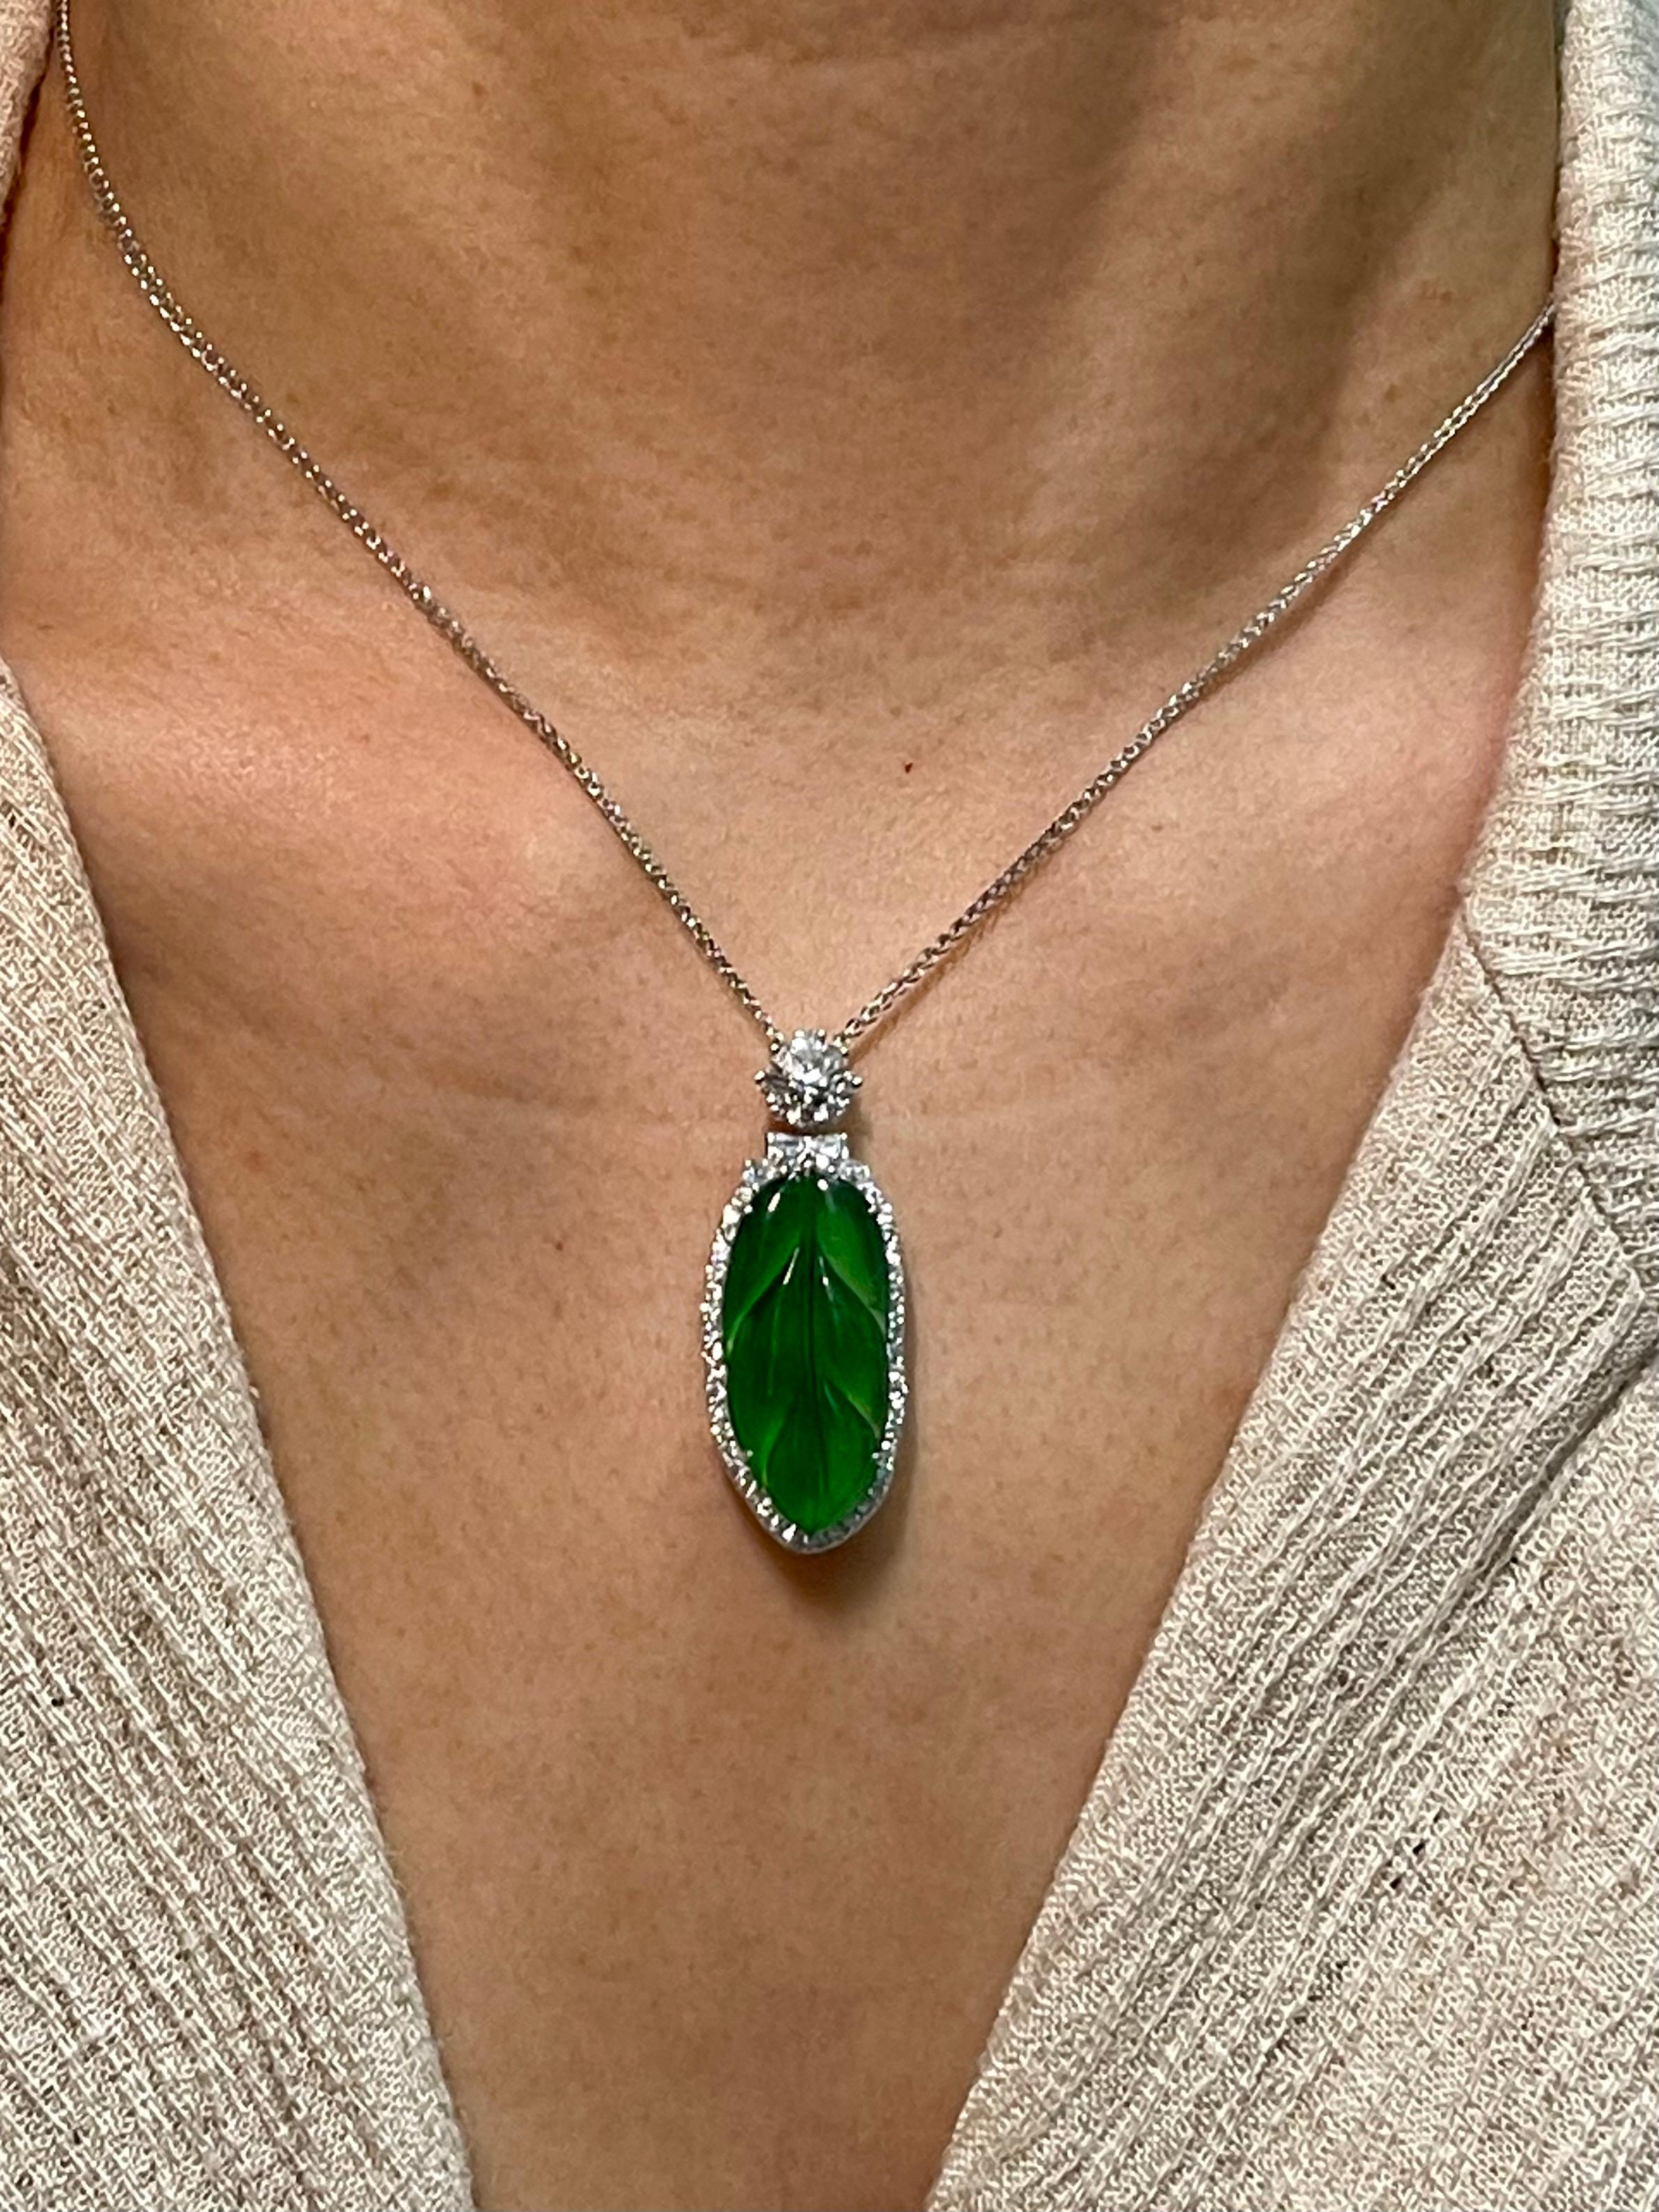 Please check out the HD video! This is imperial green jade. This is certified by two labs to be natural jadeite jade. The pendant is set in 18k white gold. There is one carved imperial green jade leaf motifs and a conservative estimation of 0.75 cts